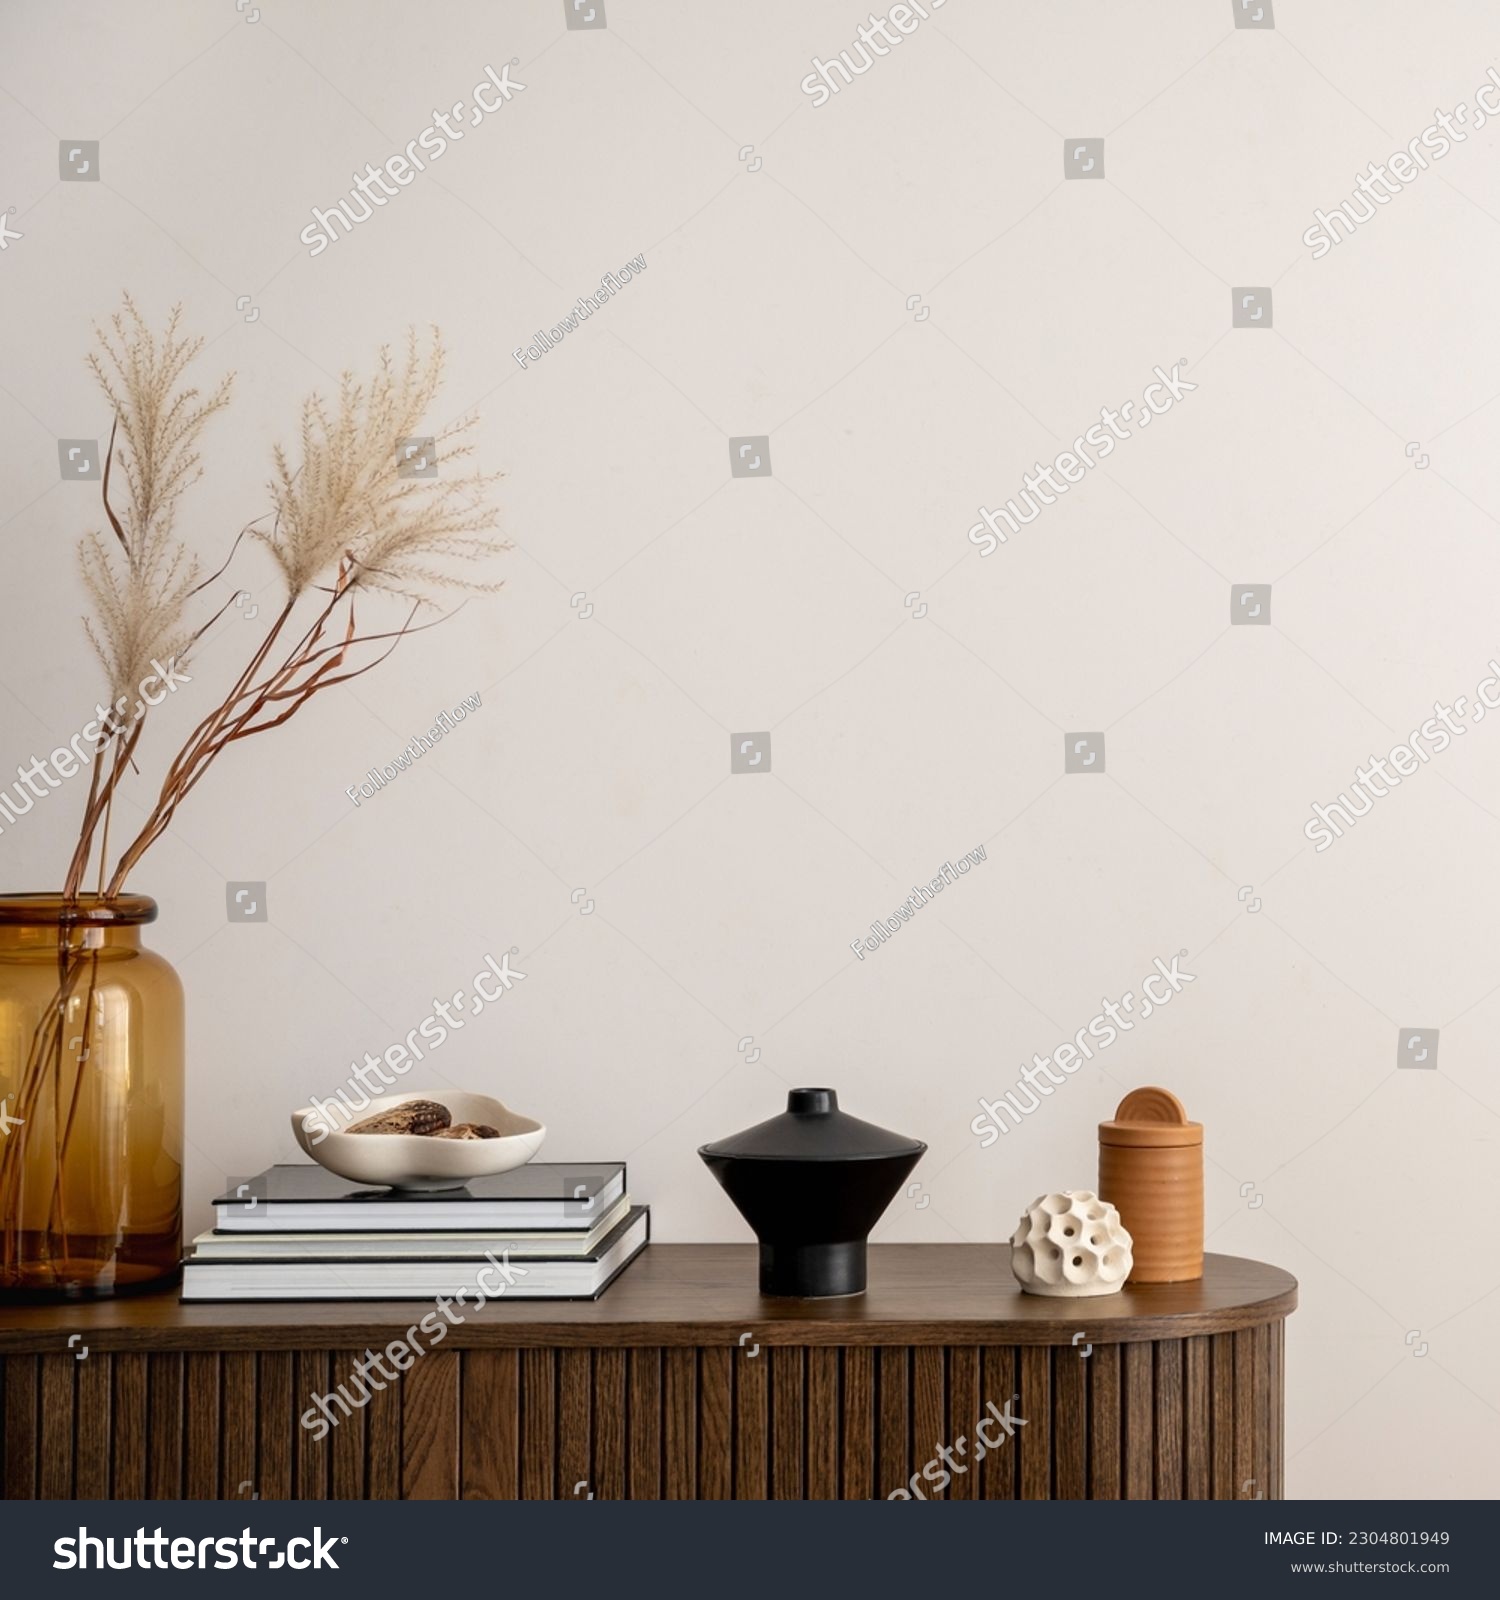 Minimalist composition of living room interior with copy space, wooden commode, vase with dried flowers, candle, black books and personal accessories. Home decor. Template.  #2304801949